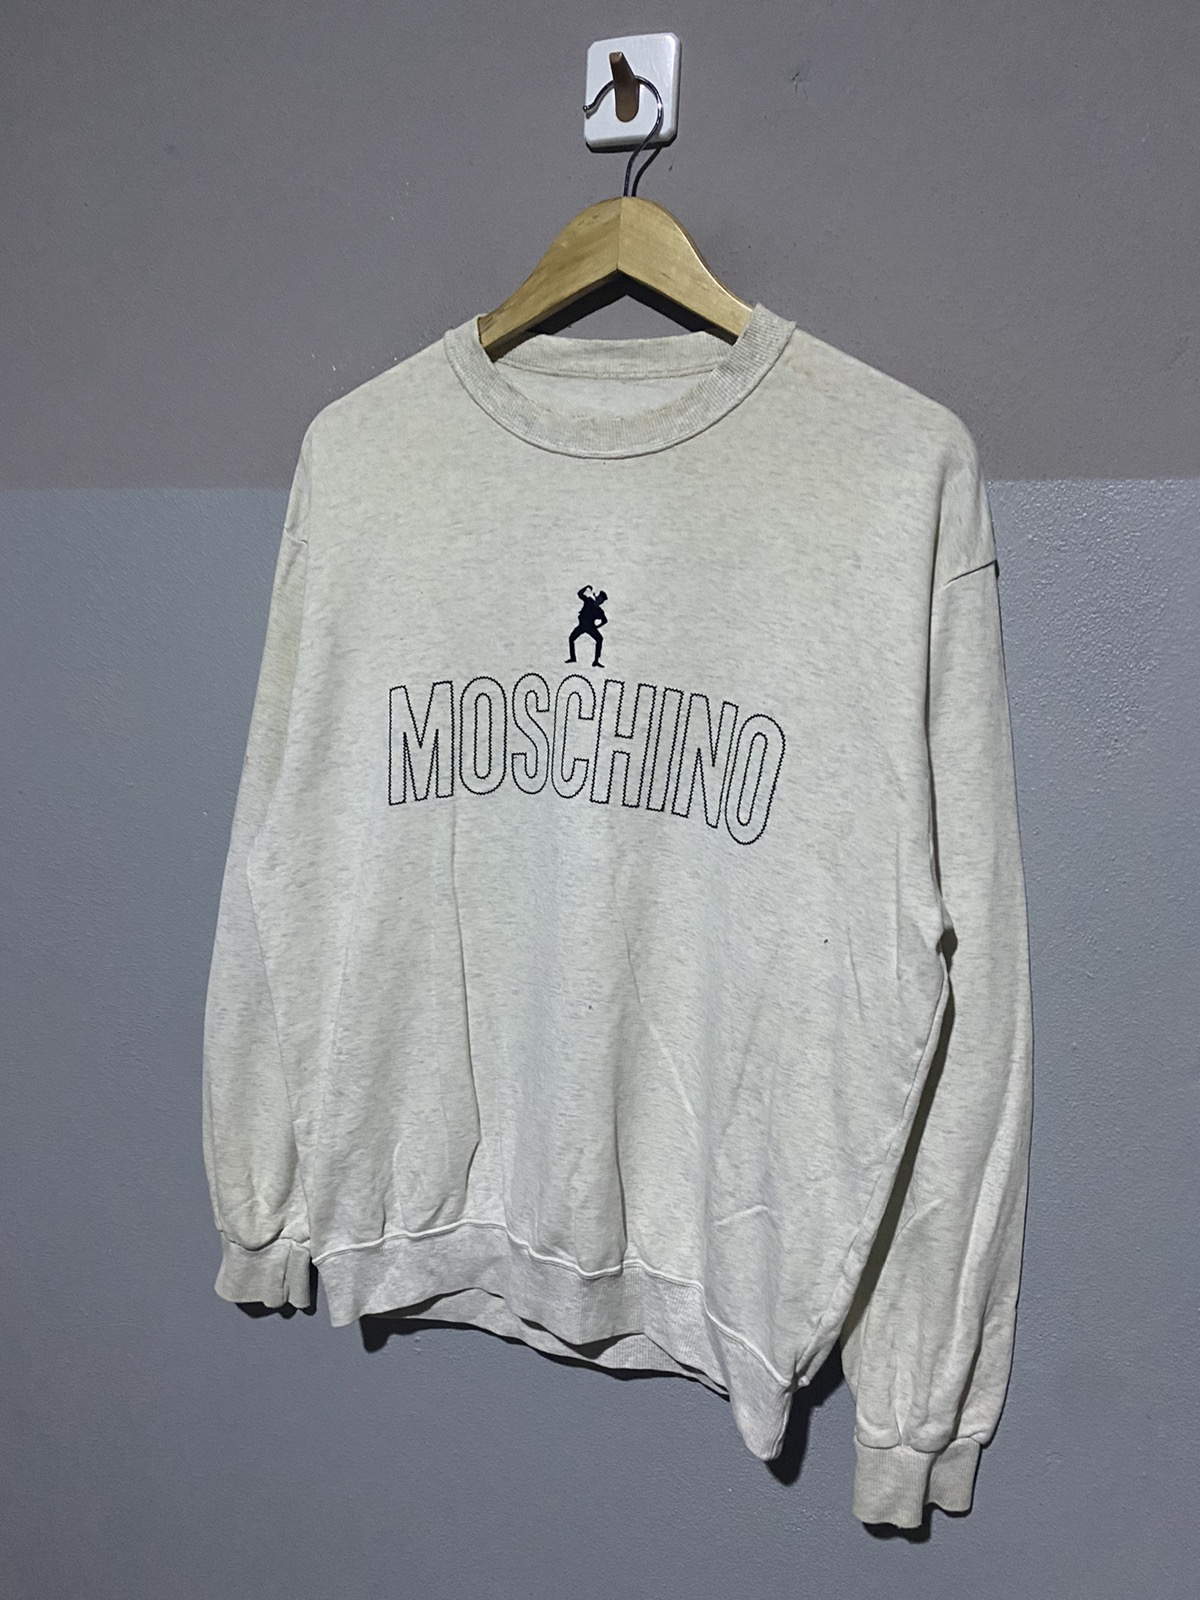 🔥SALE🔥MOSCHINO SWEATSHIRTS EMBROIDERED LOGOS MADE IN JAPAN - 5